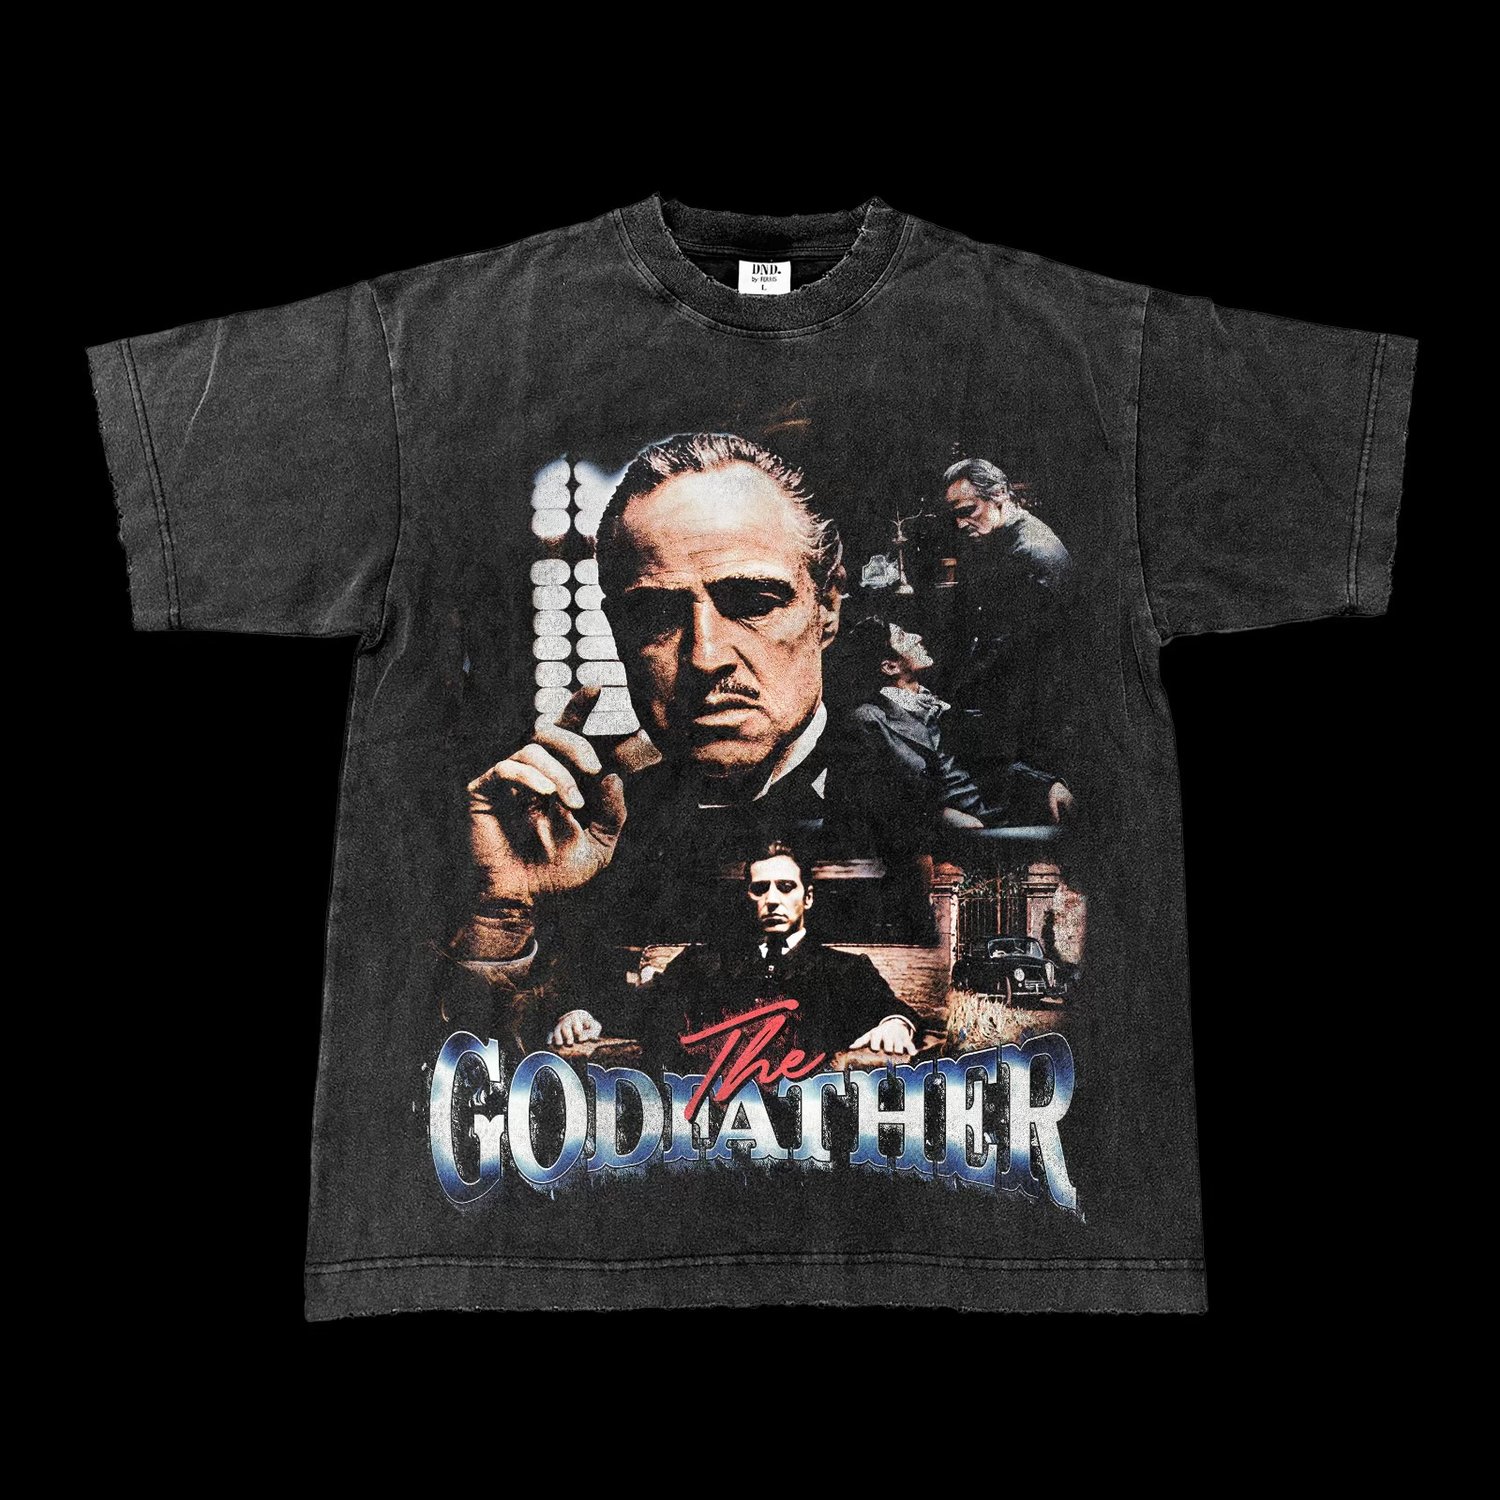 The Godfather T